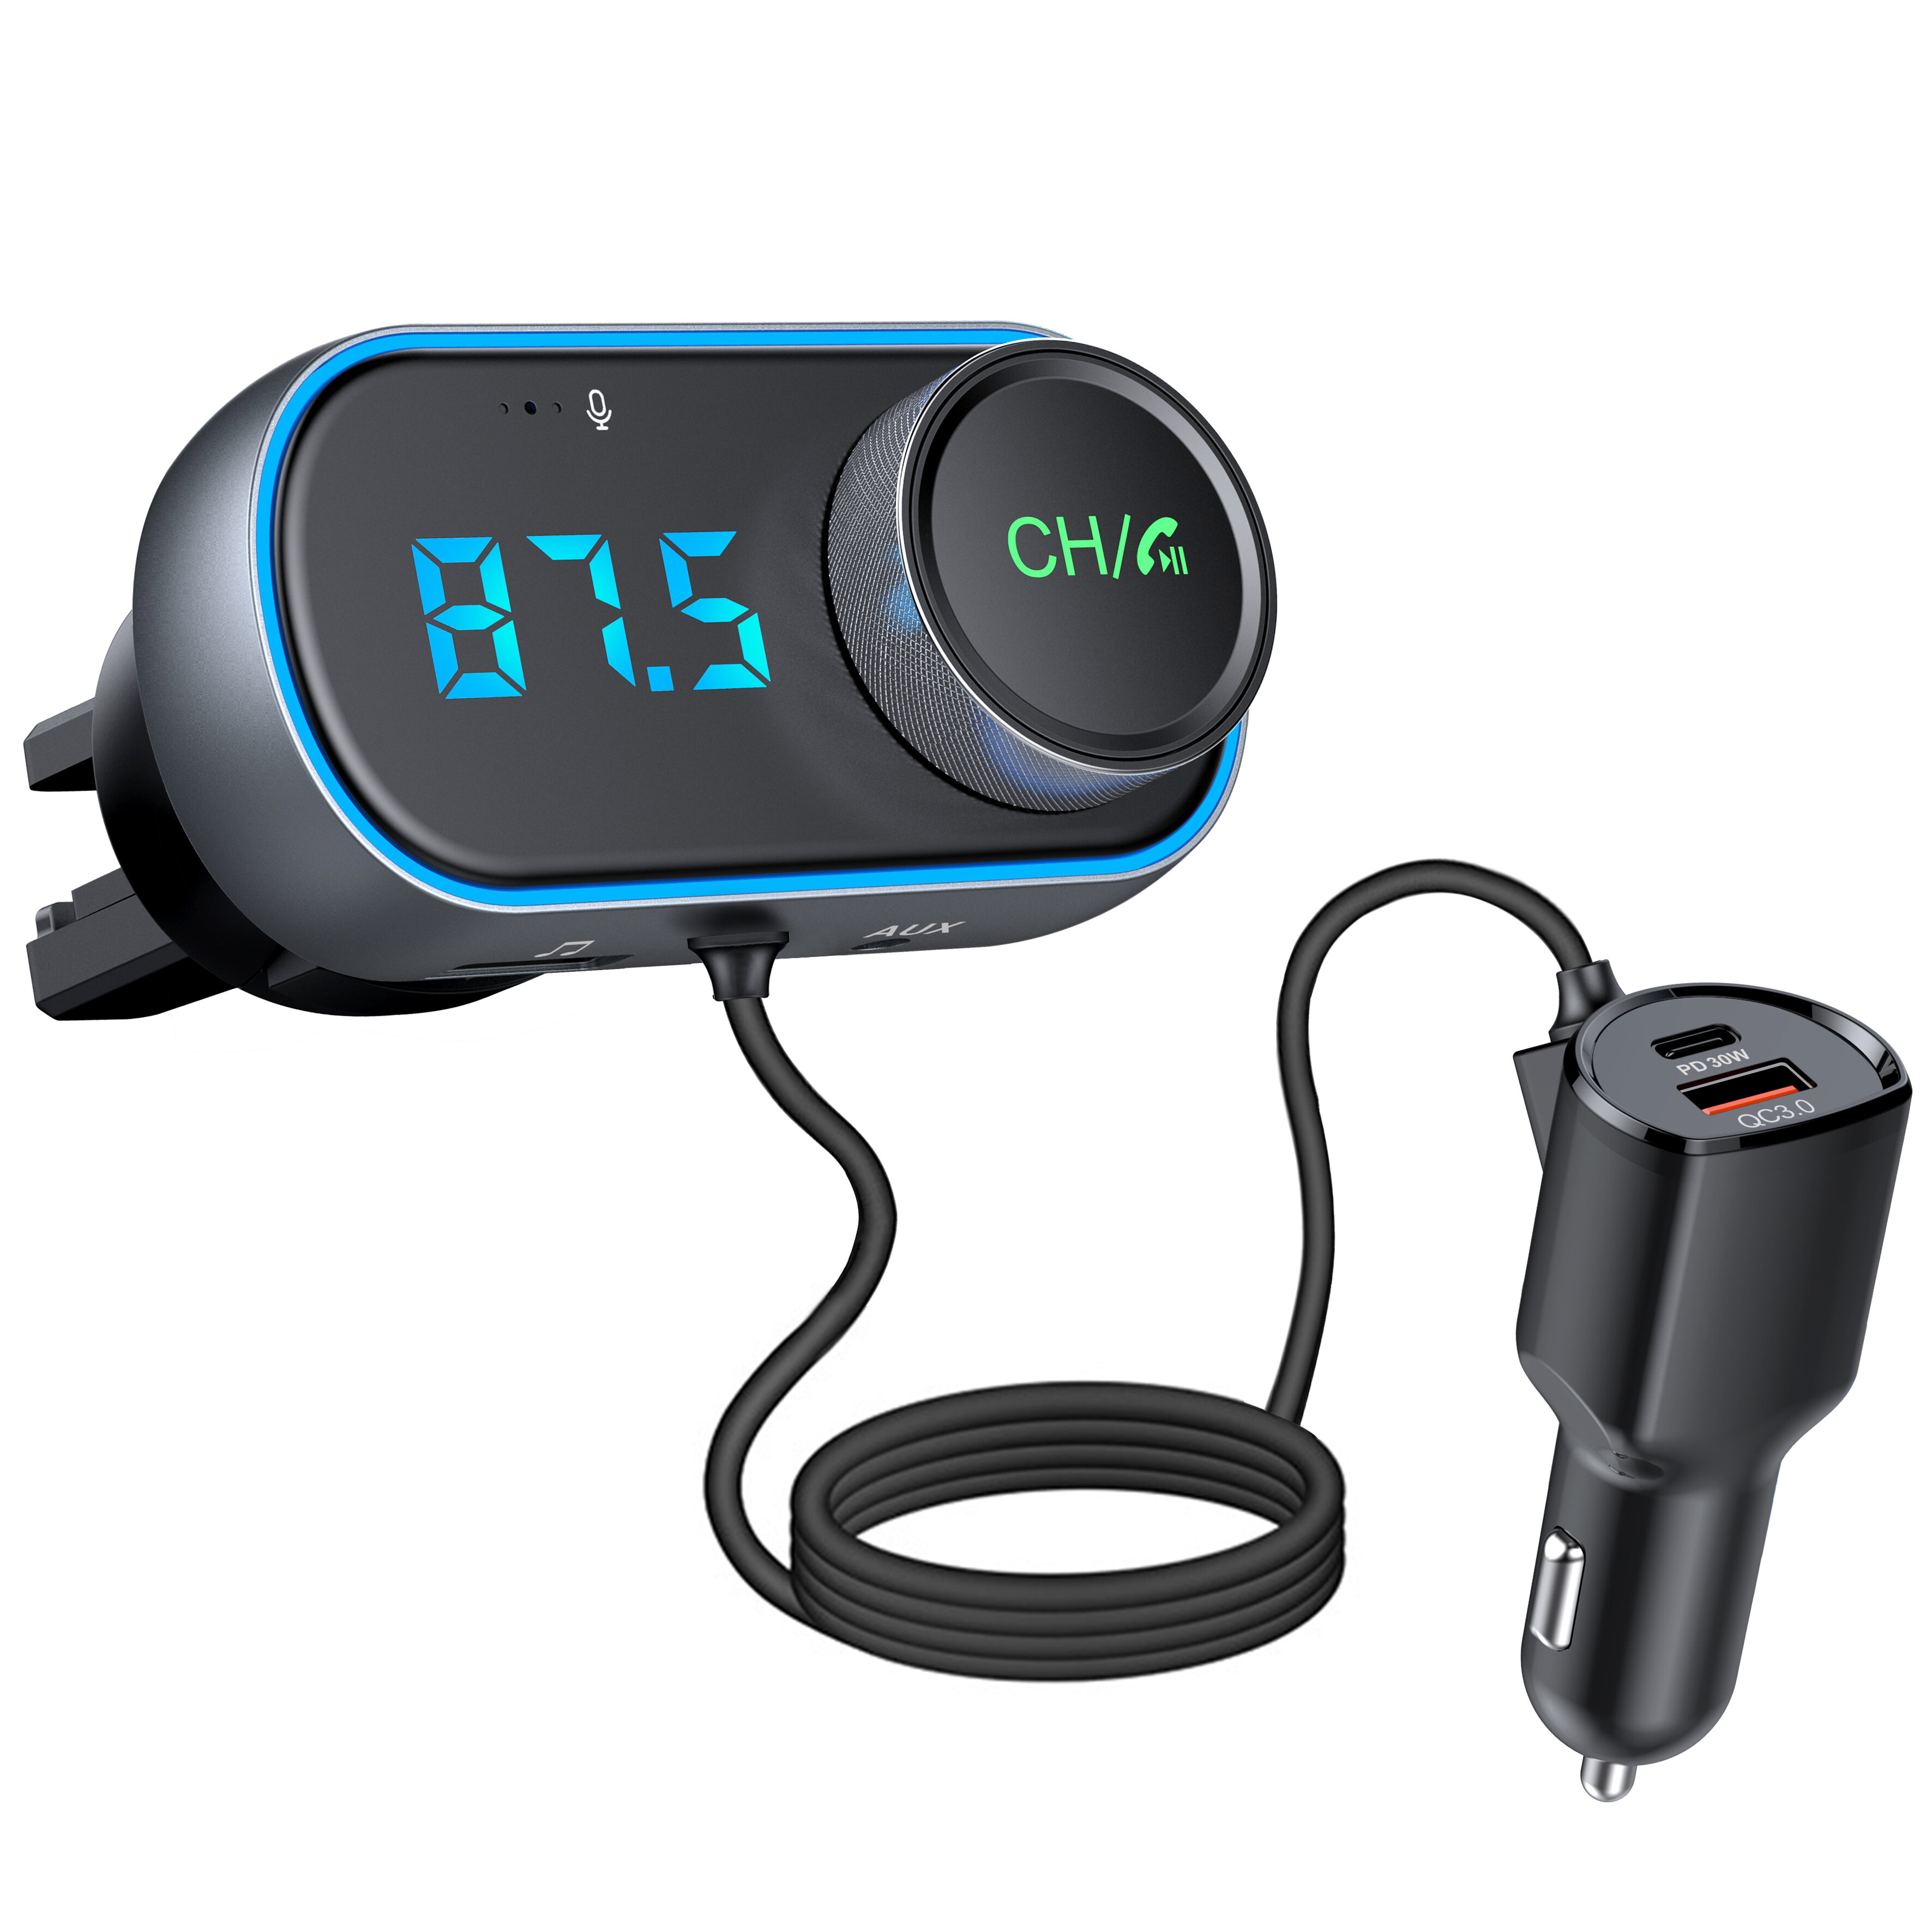 best price,t78,air,outlet,car,bluetooth,v5.0,fm,transmitter,charger,discount